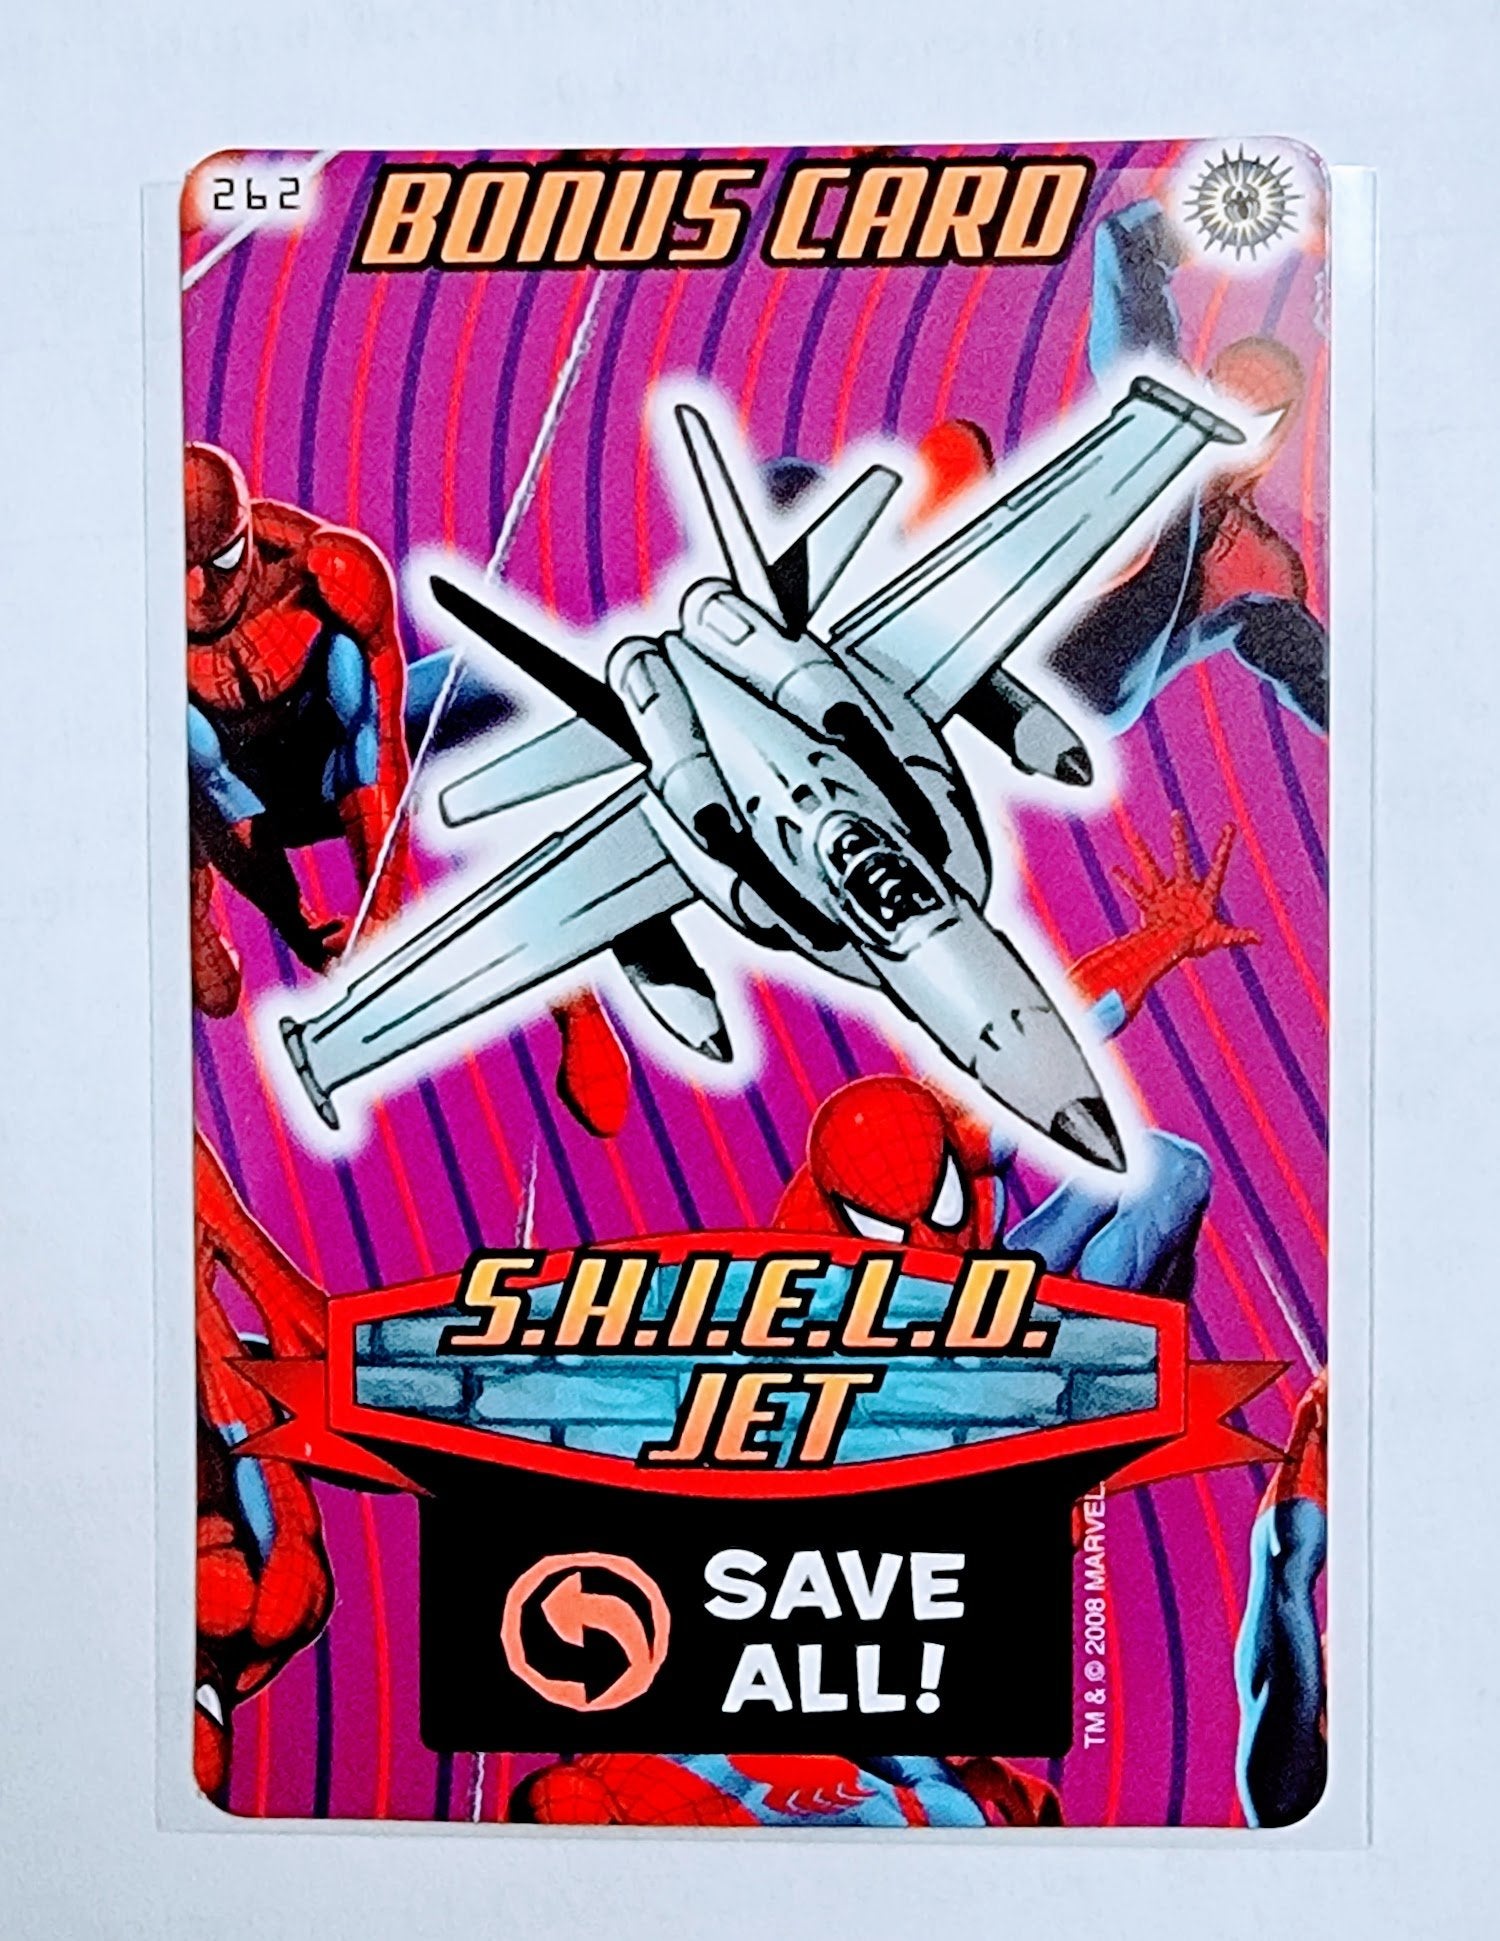 2008 Spiderman Heroes and Villains S.H.I.E.L.D Jet Bonus Card #10 Marvel Booster Trading Card UPTI simple Xclusive Collectibles   